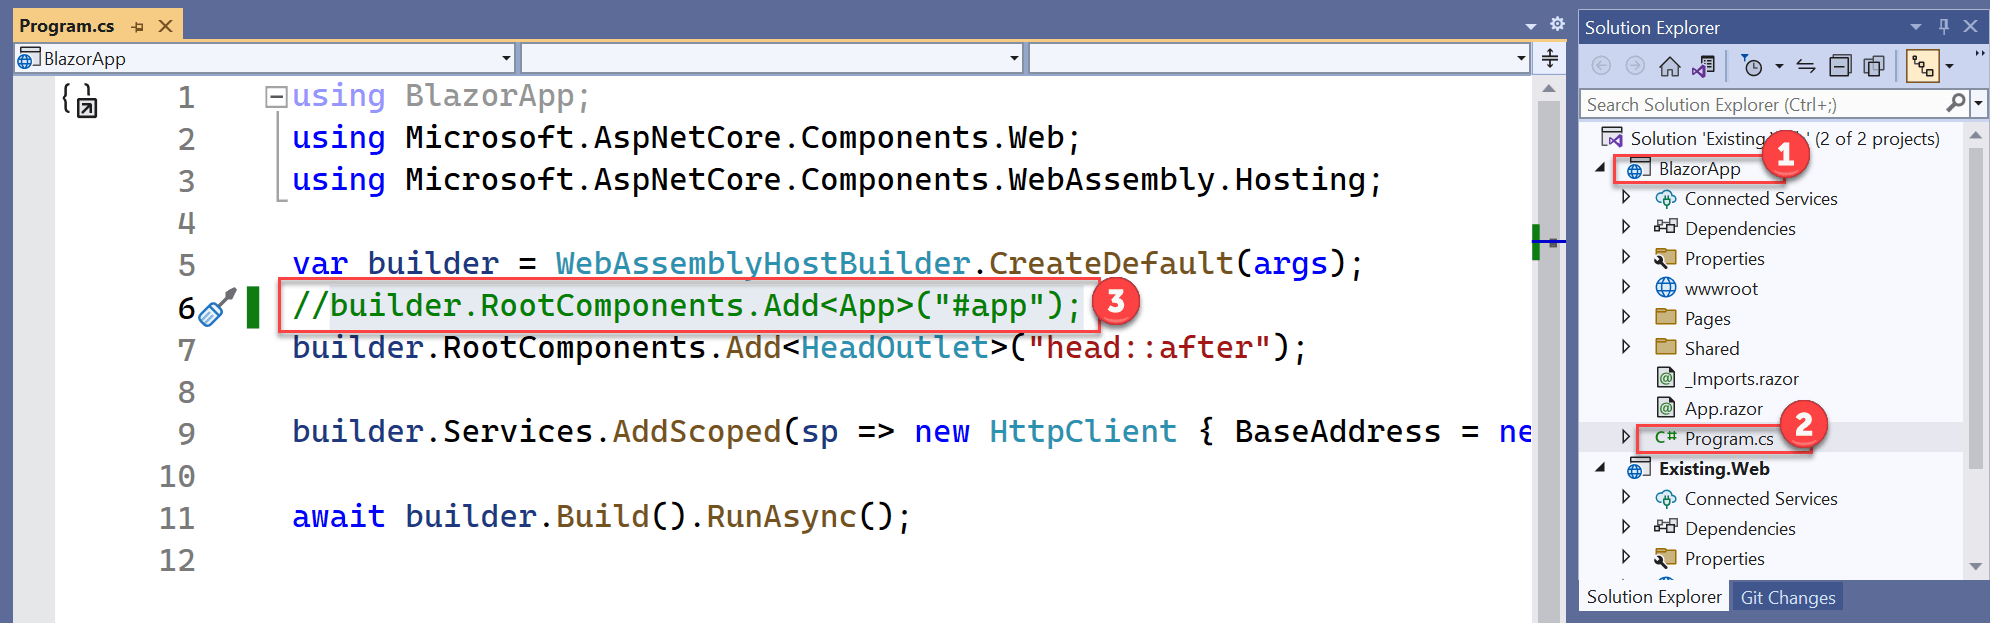 Visual Studio 2022 displays with the BlazorApp project expanded and the Program.cs code file selected. In the code editor window the line of code mentioned above is commented out.